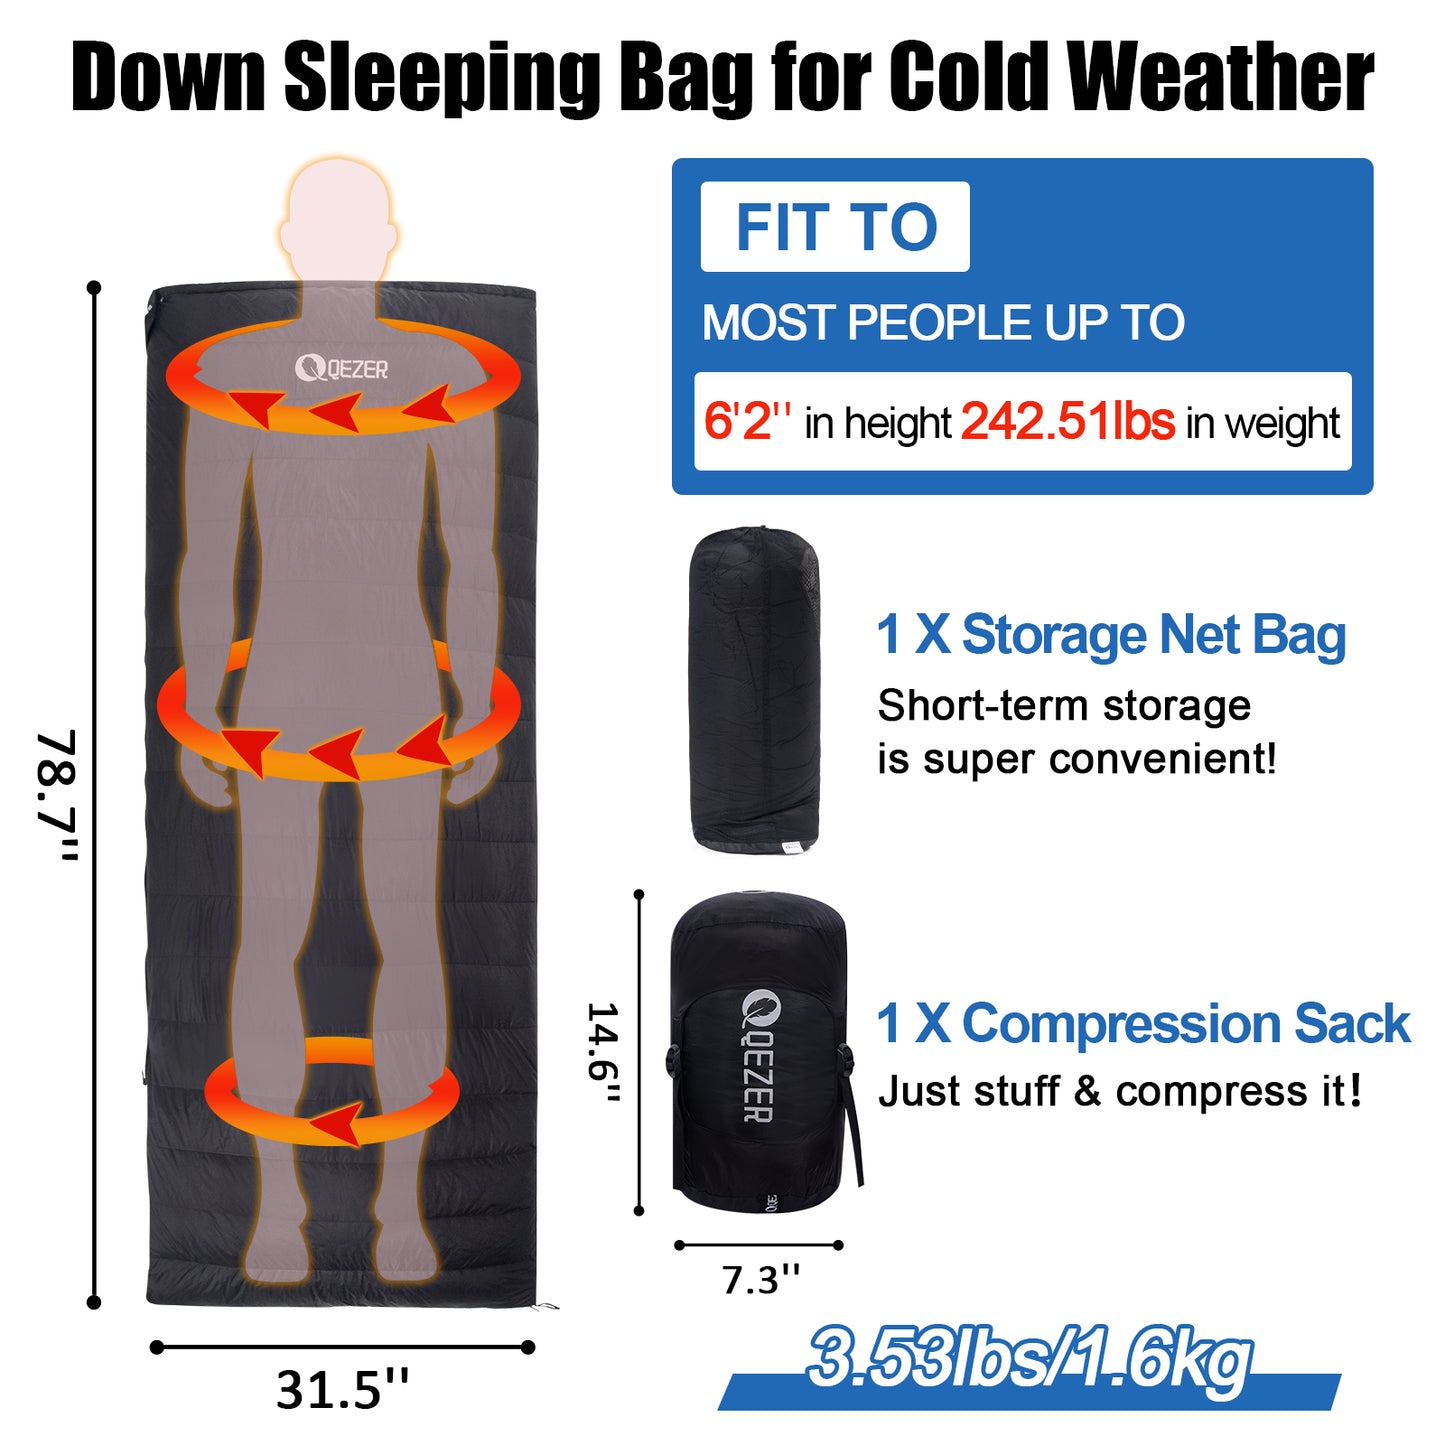 QEZER Down Sleeping Bag for Adults, Lightweight Warmer Rectangular Sleeping Bag for  Cold Weather Camping and montaineering Outdoor, can be used as the blanket